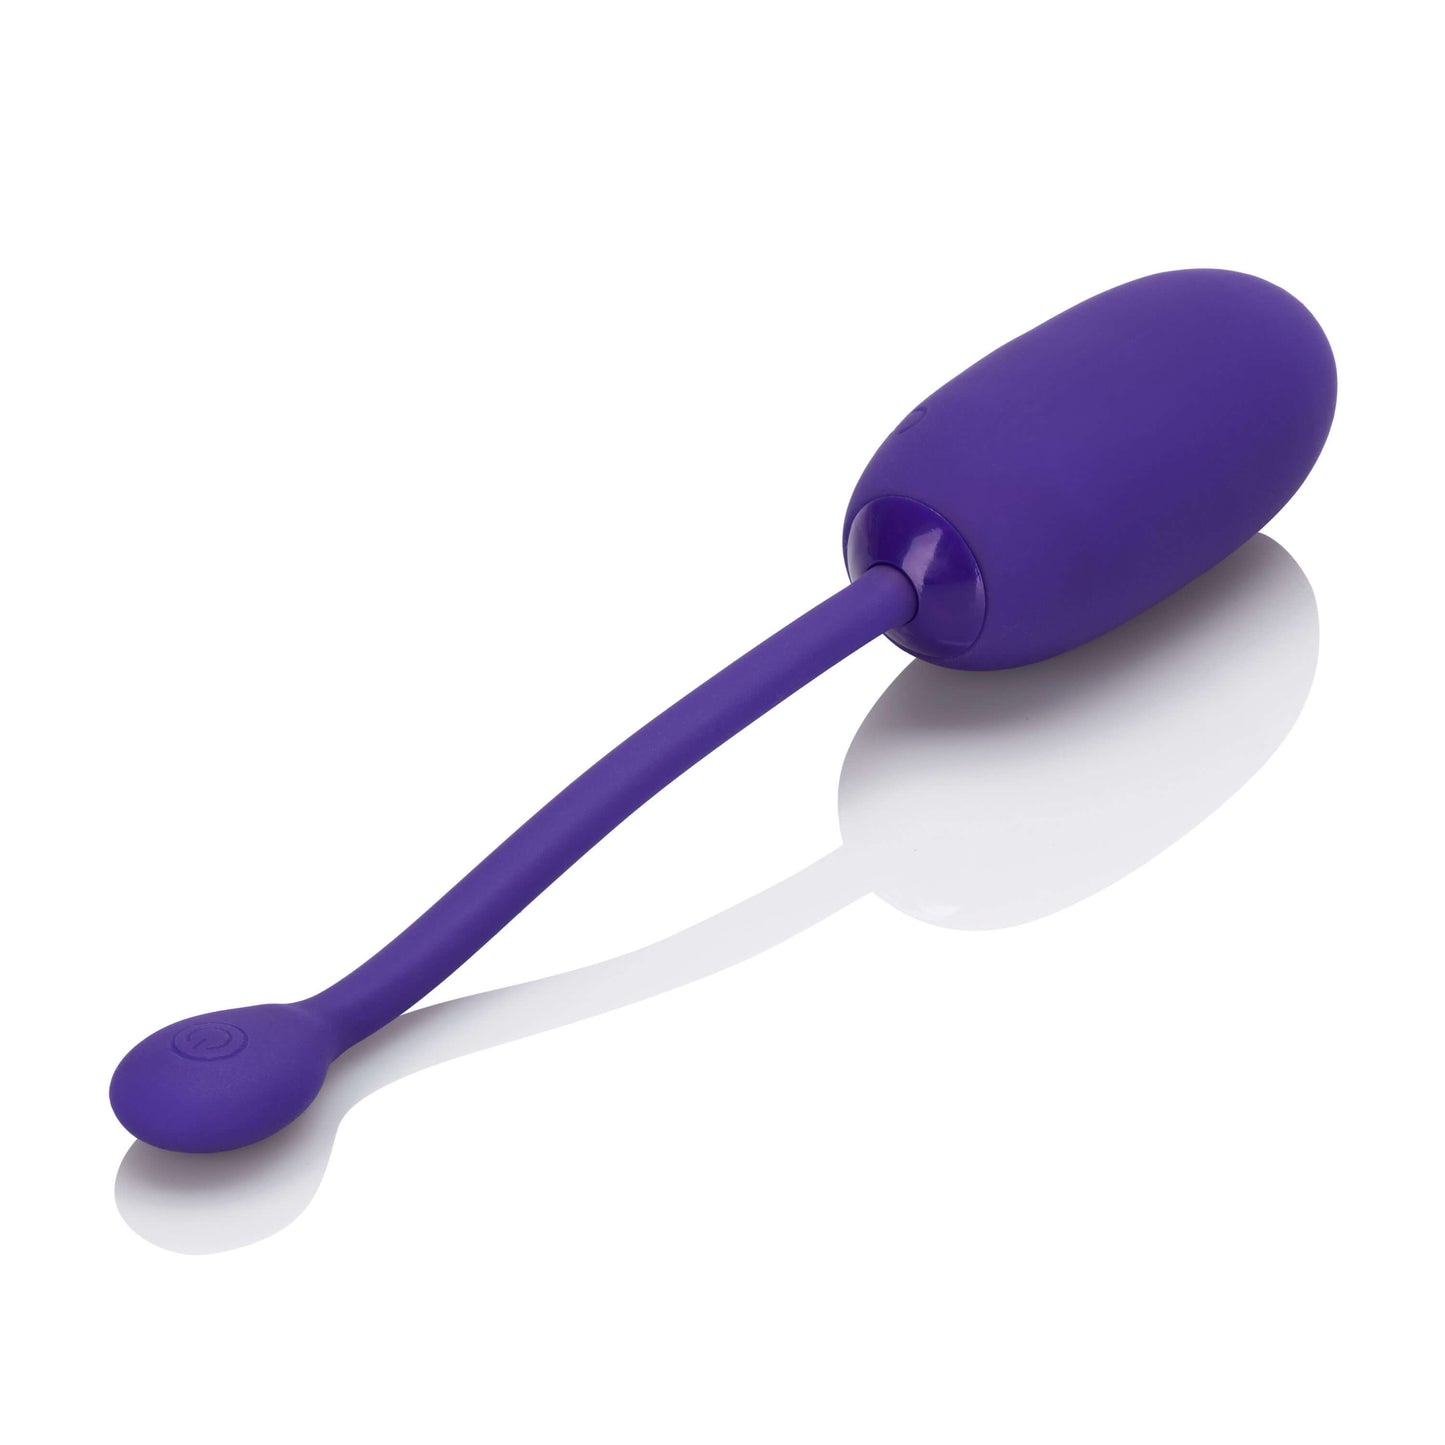 CalExotics Rechargeable Kegel Ball Starter - The Bigger O - online sex toy shop USA, Canada & UK shipping available